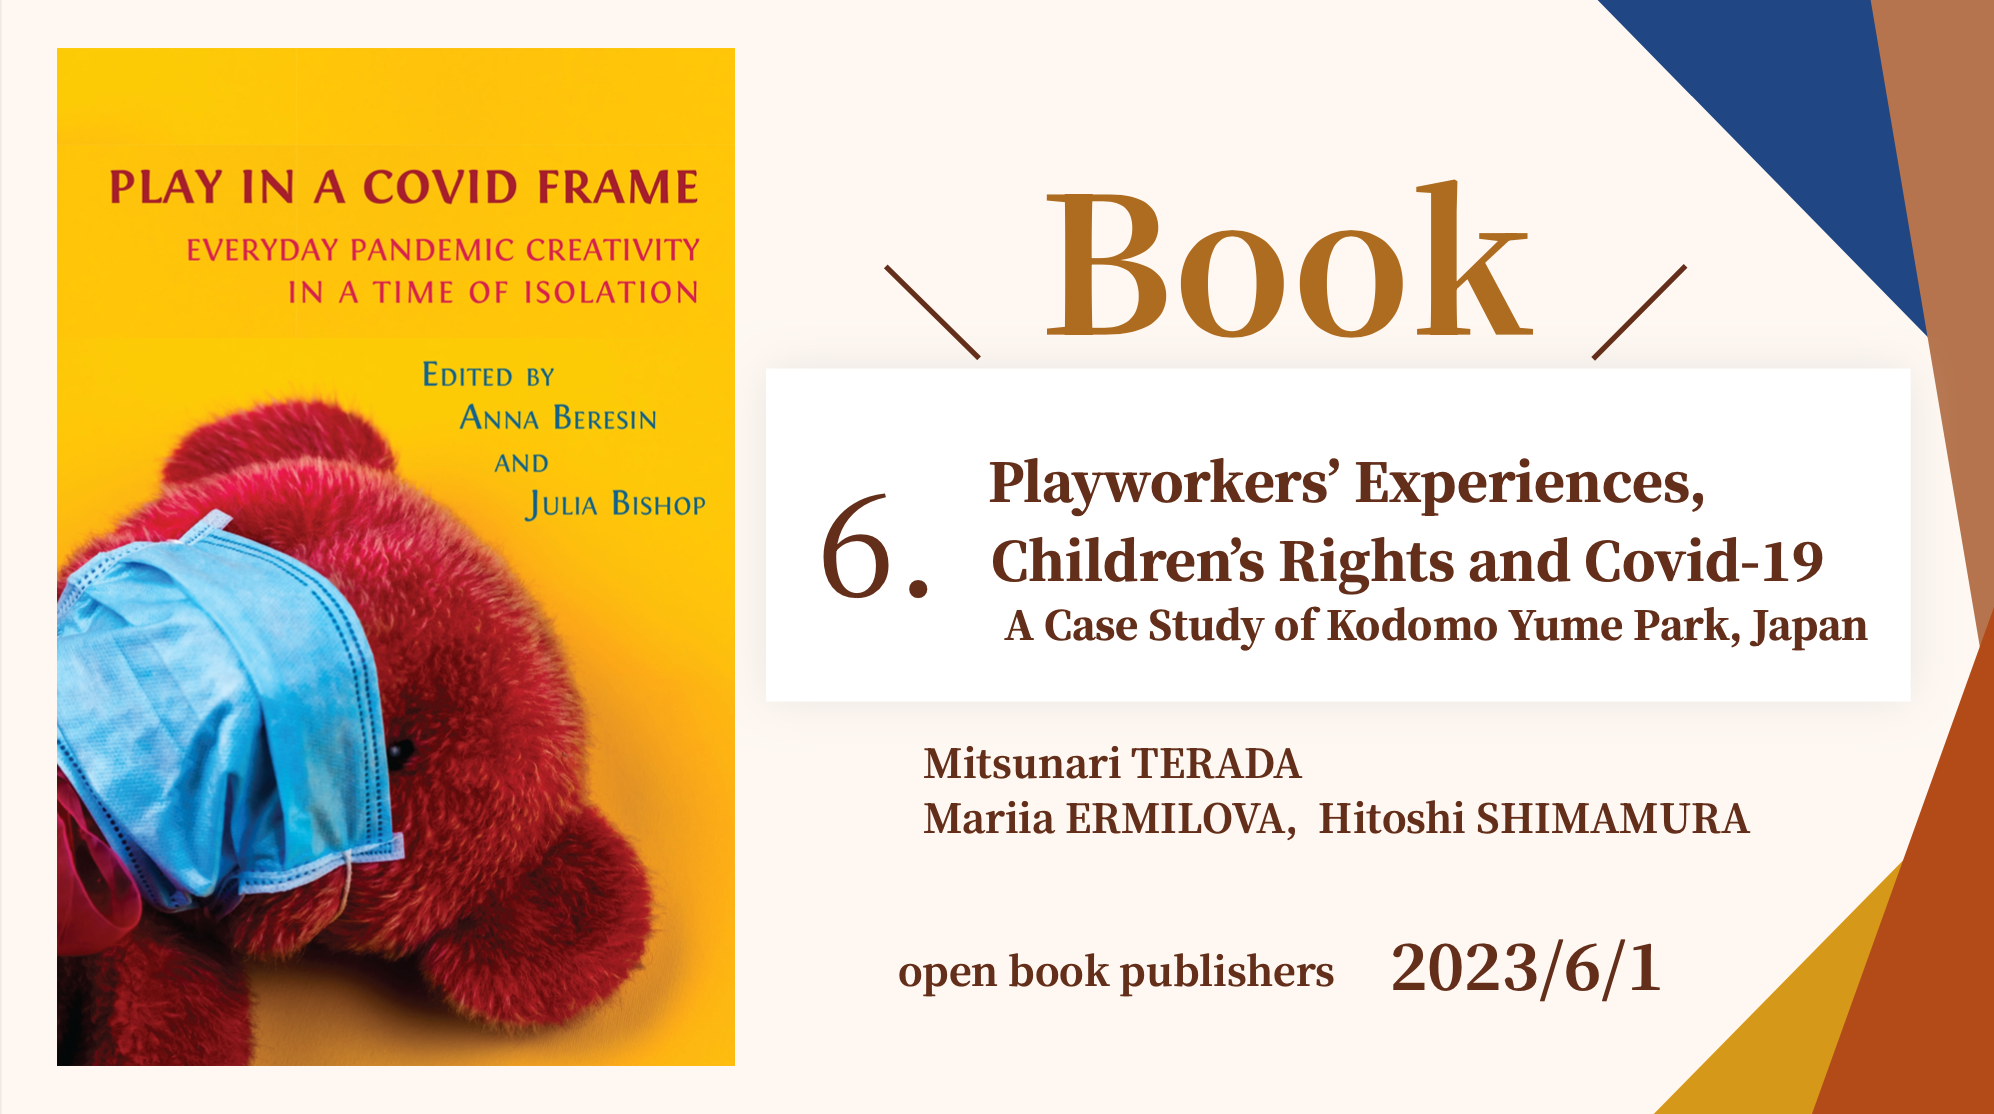 【BOOK】Play in a Covid Frame